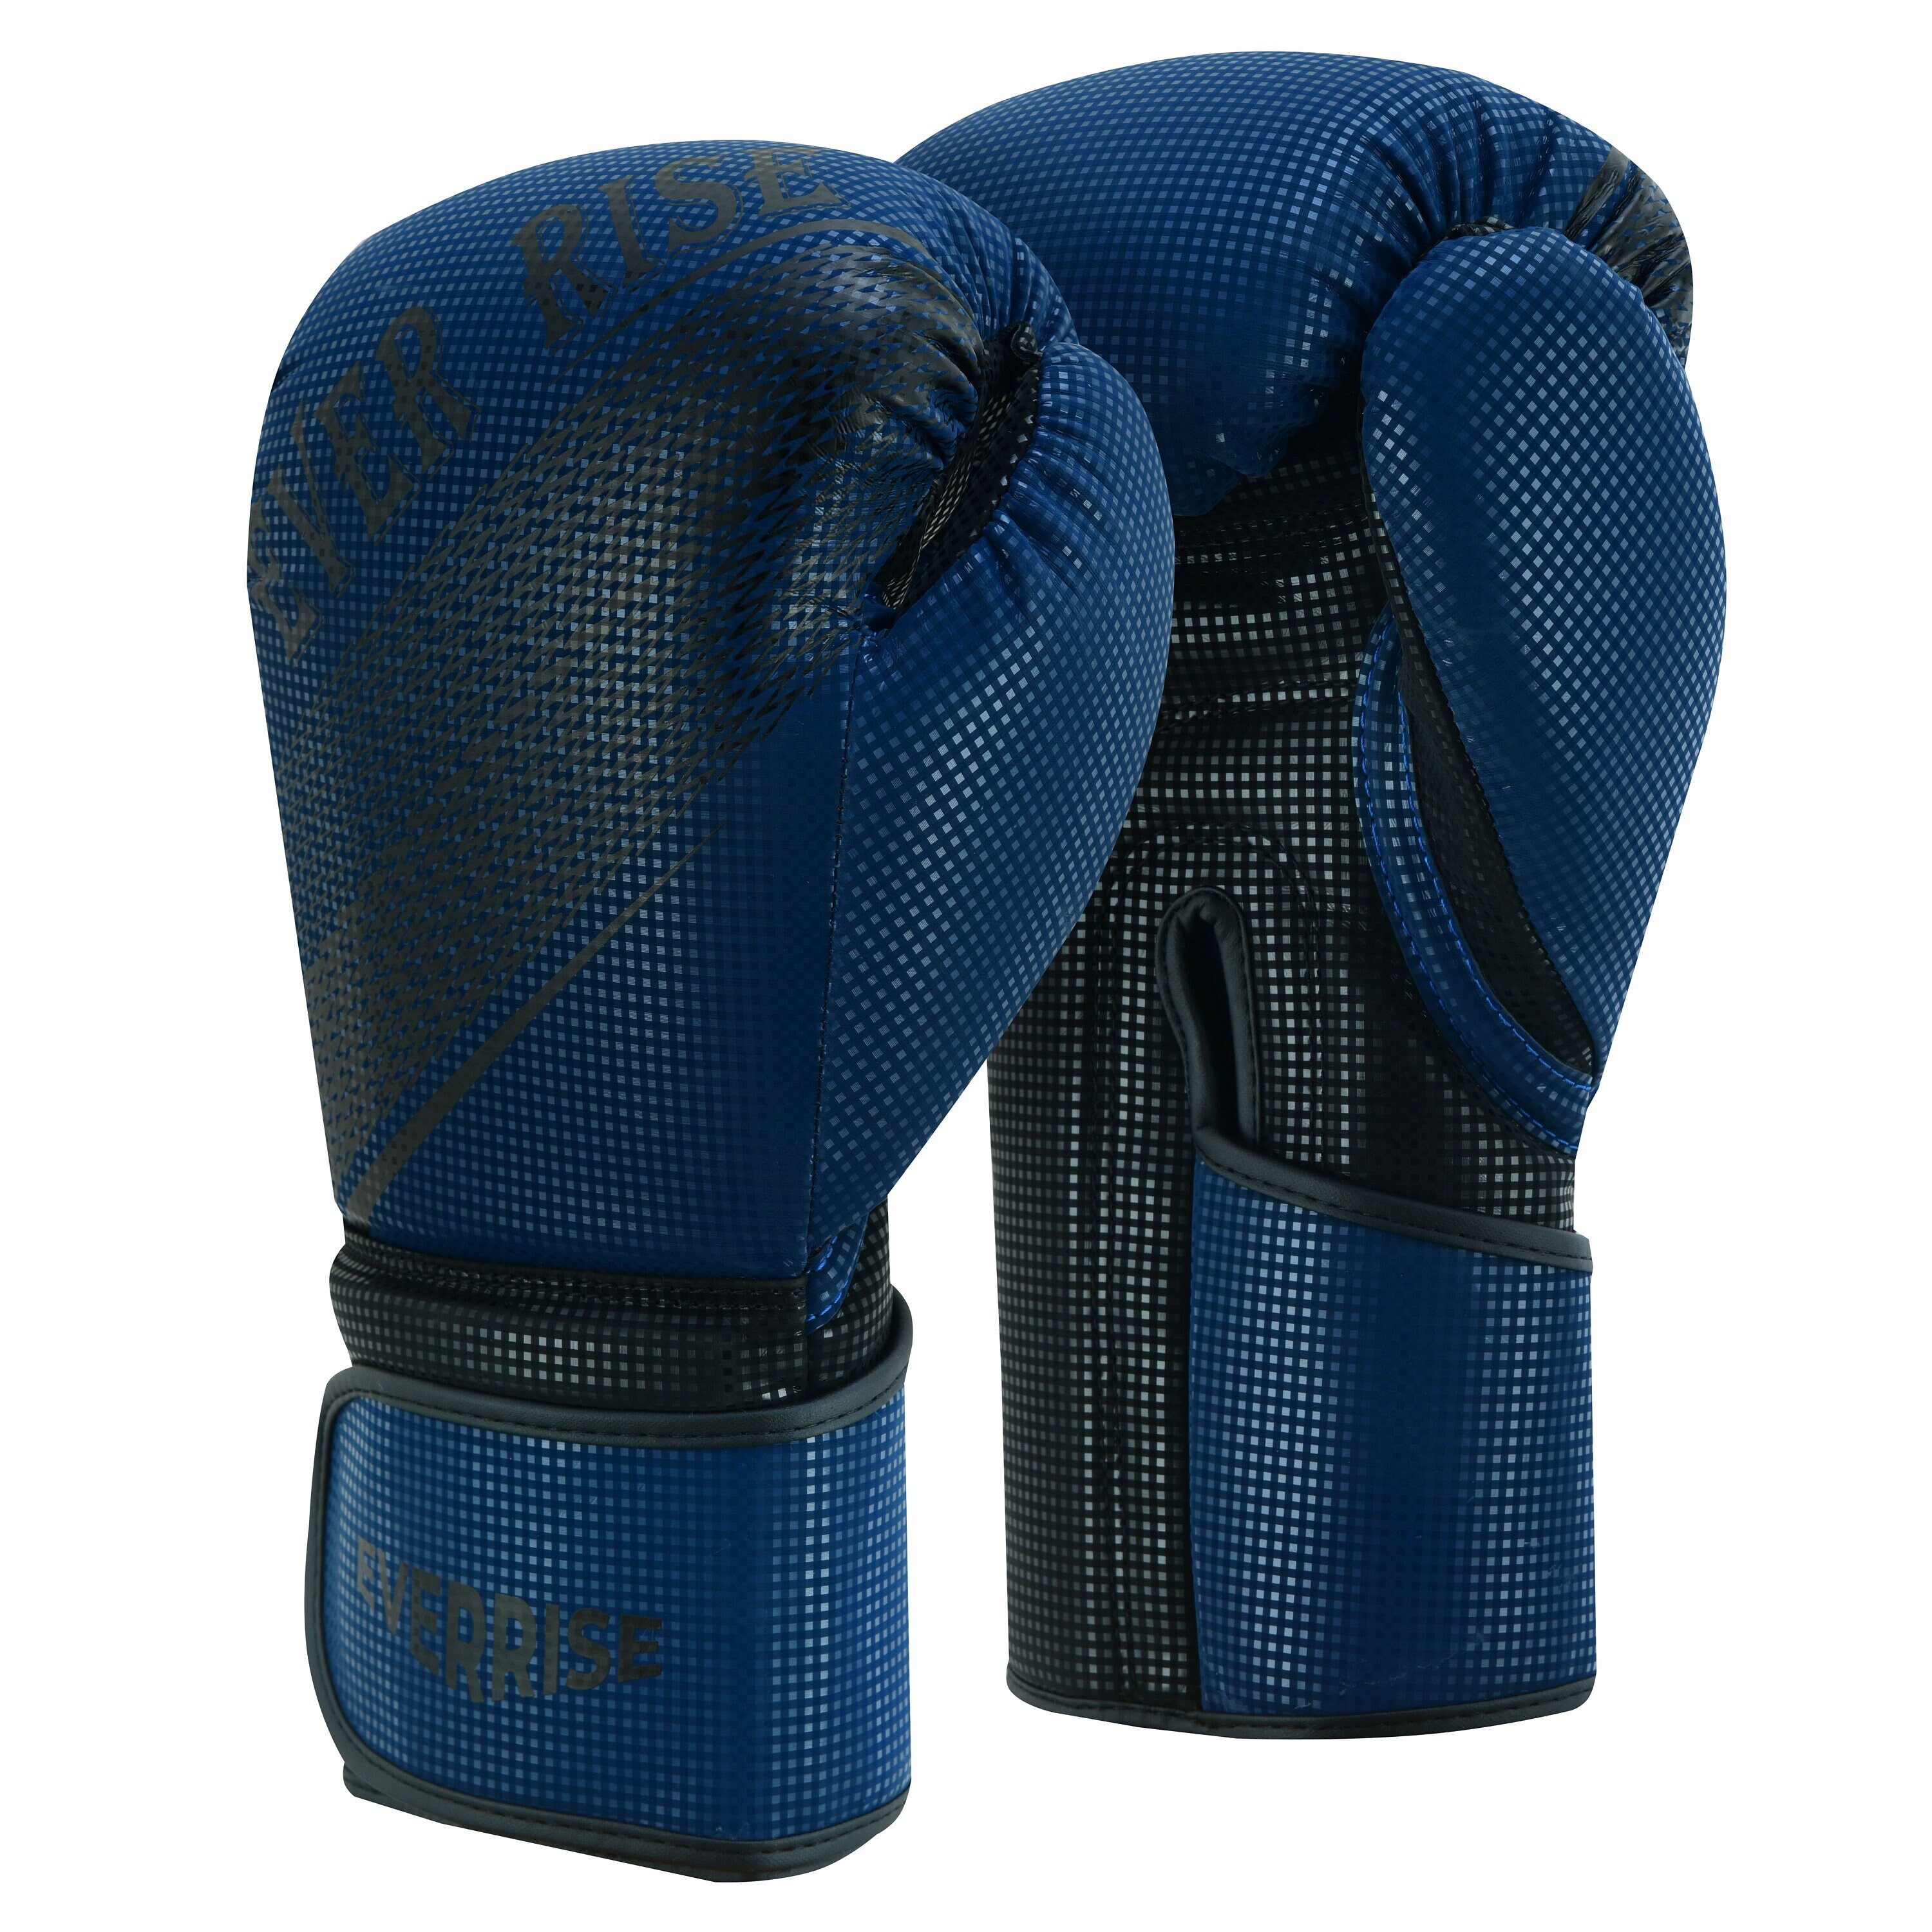 Everrise New Boxing Gloves Sparring Glove Punch Bag Training